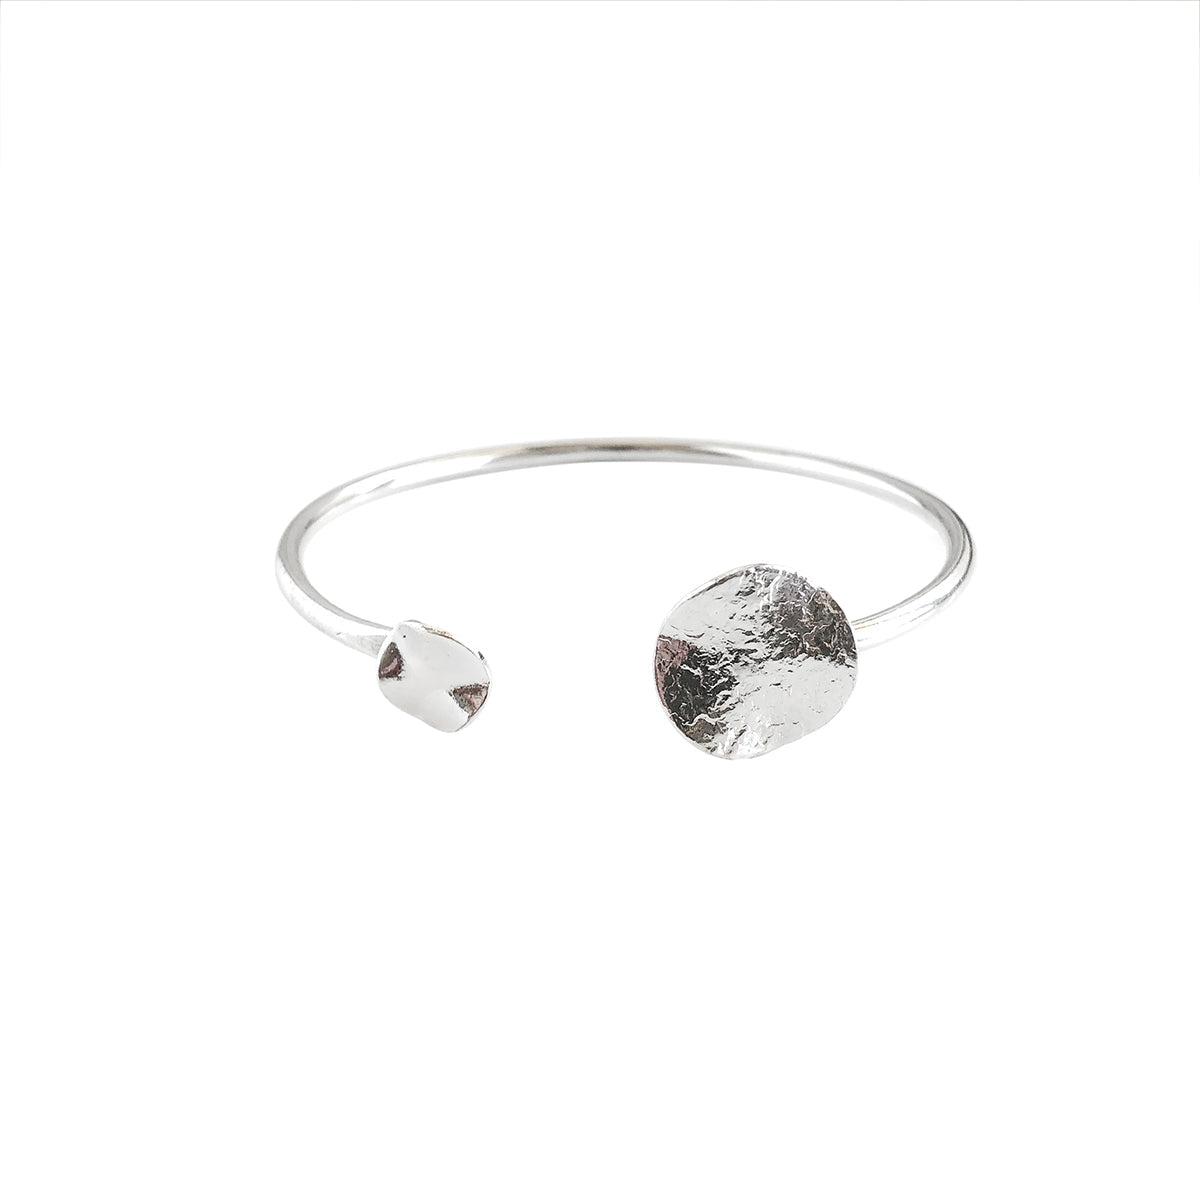 Photo of the silver Solaris Cuff, on a white background.